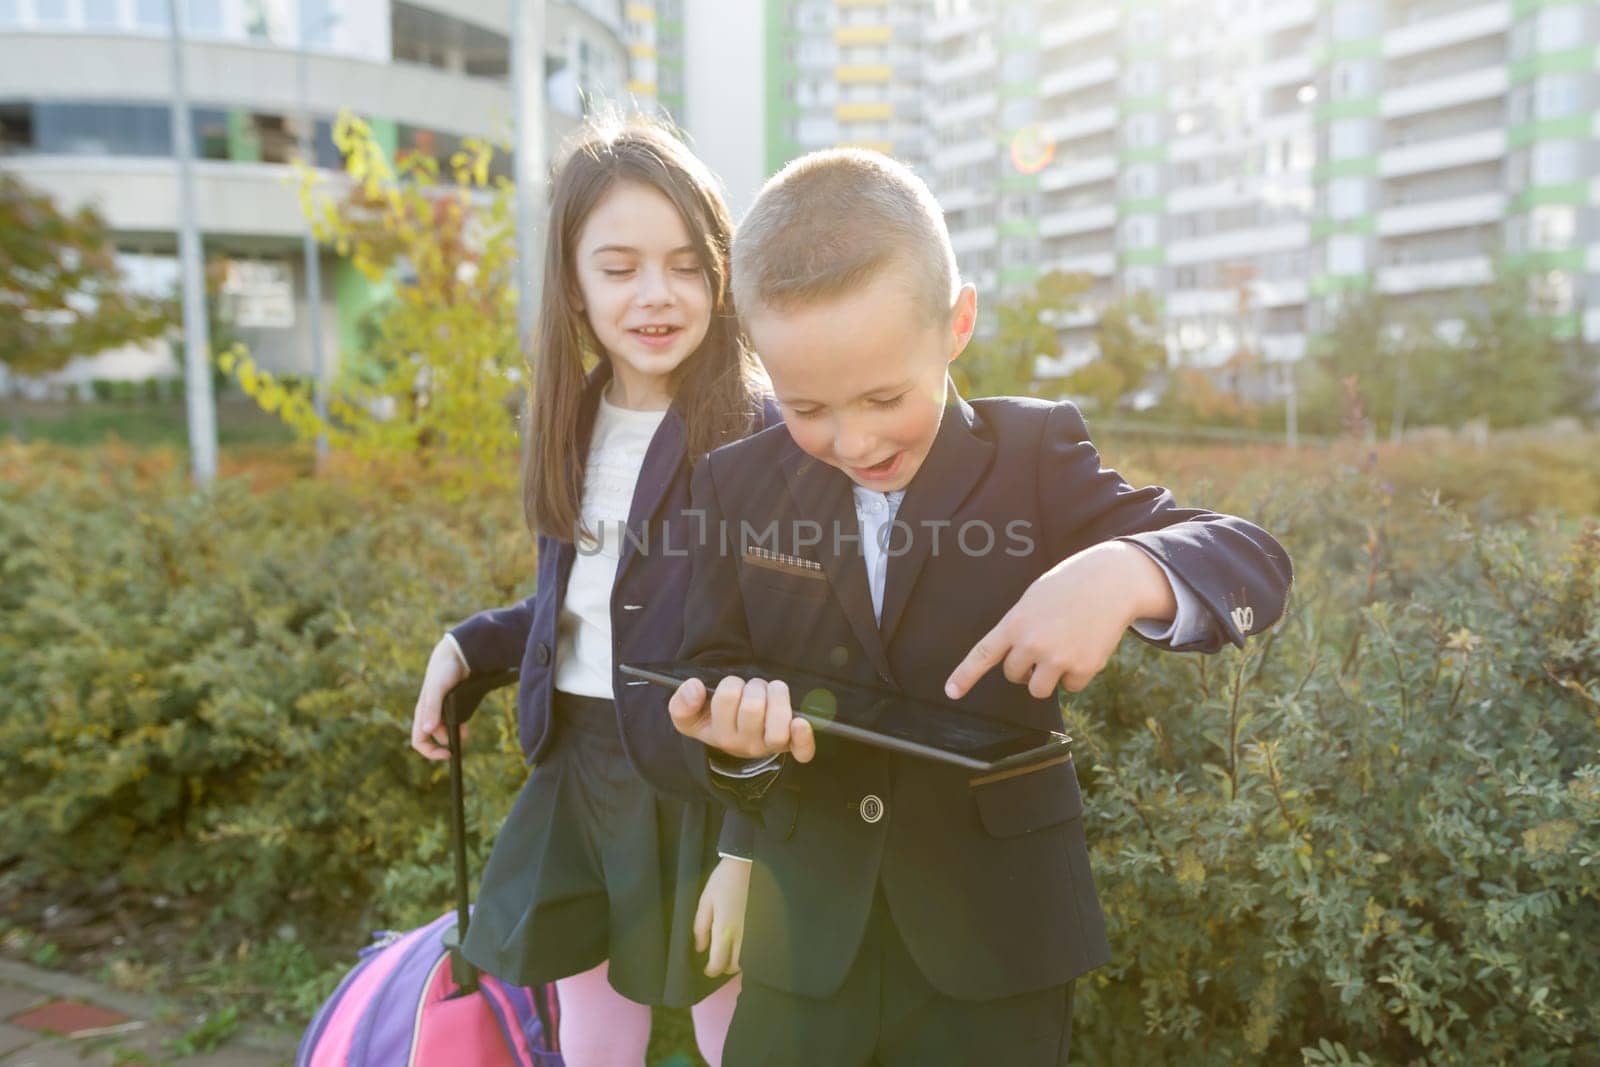 Boy and girl pupils in primary school with digital tablet. Outdoor background, children with school bags, look at the tablet. Education, friendship, technology and people concept